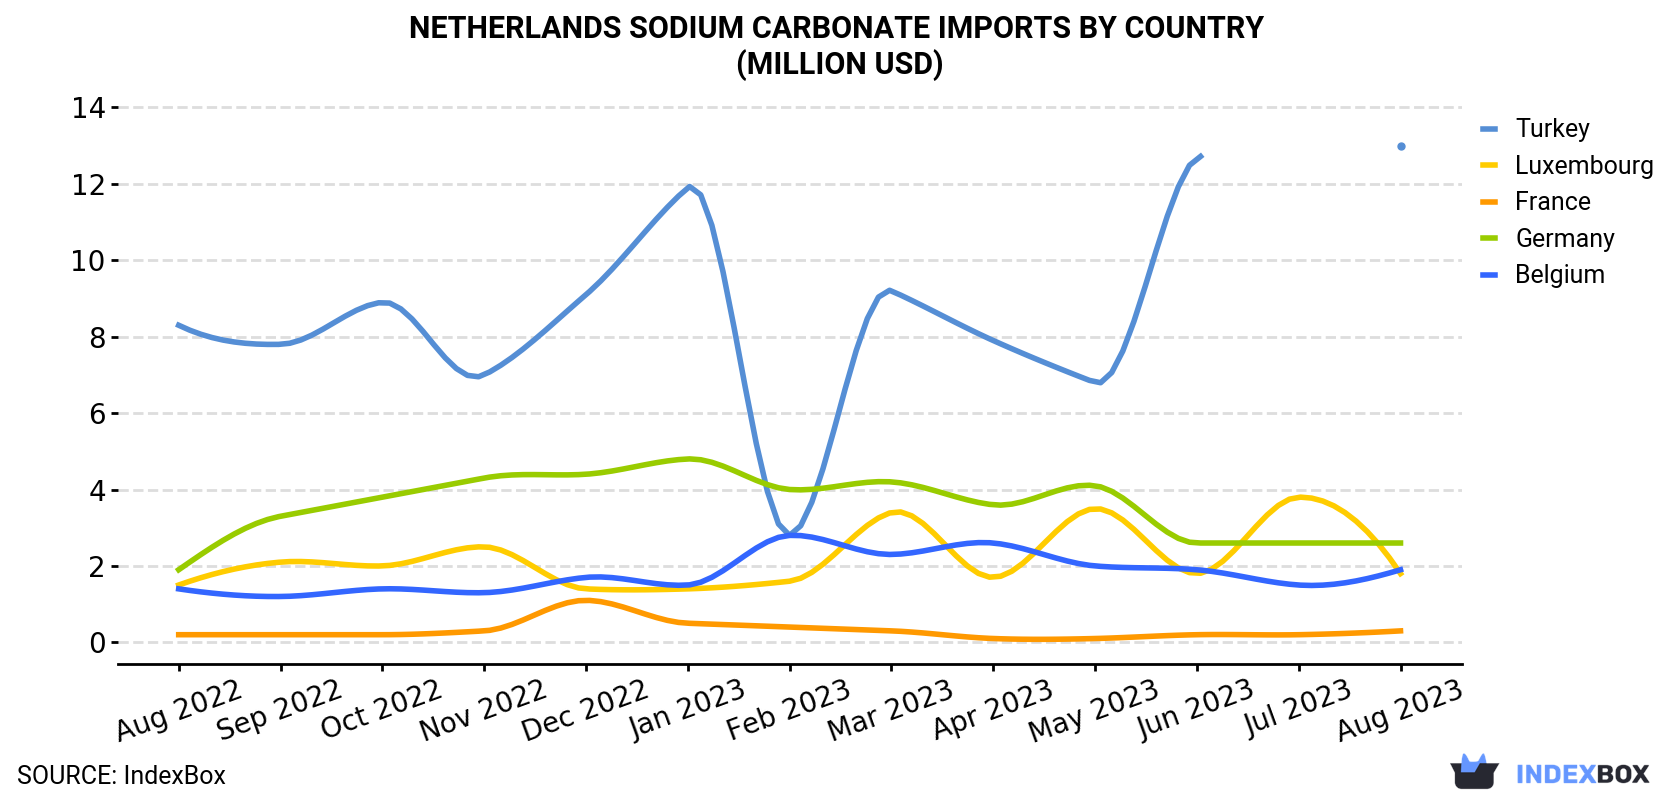 Netherlands Sodium Carbonate Imports By Country (Million USD)